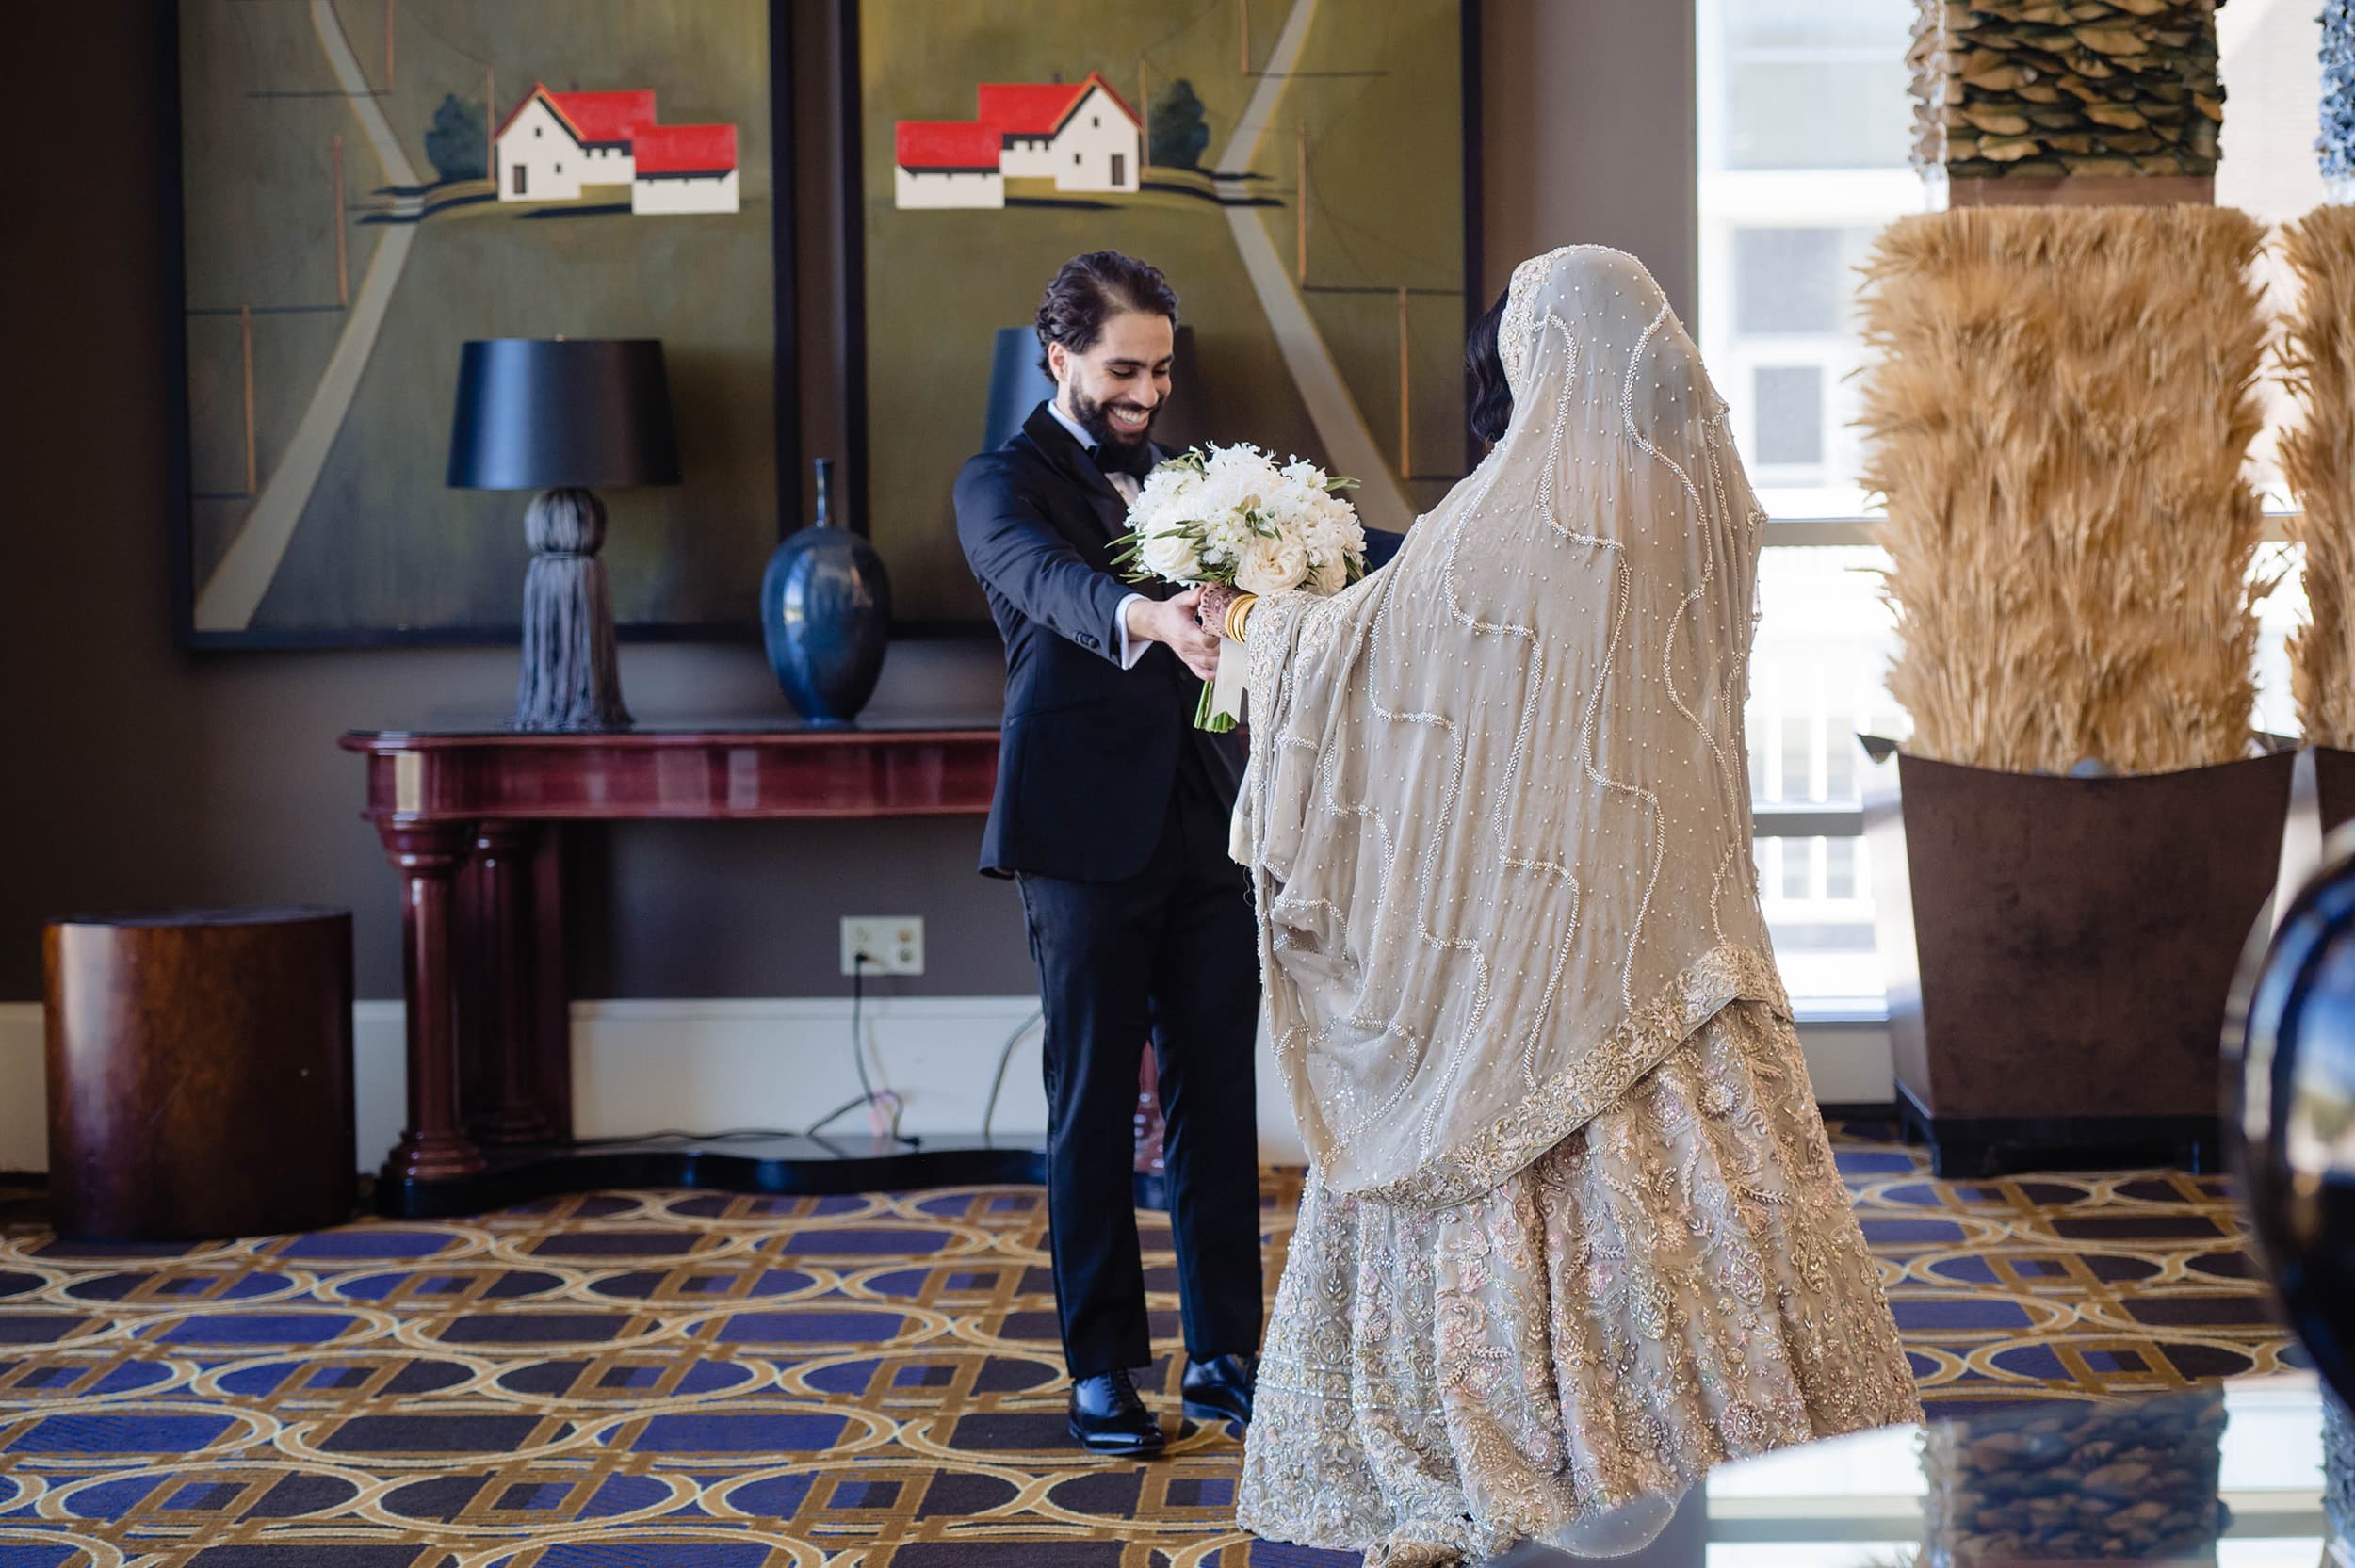 Muslim wedding traditions may require a bride and groom to do a first look 